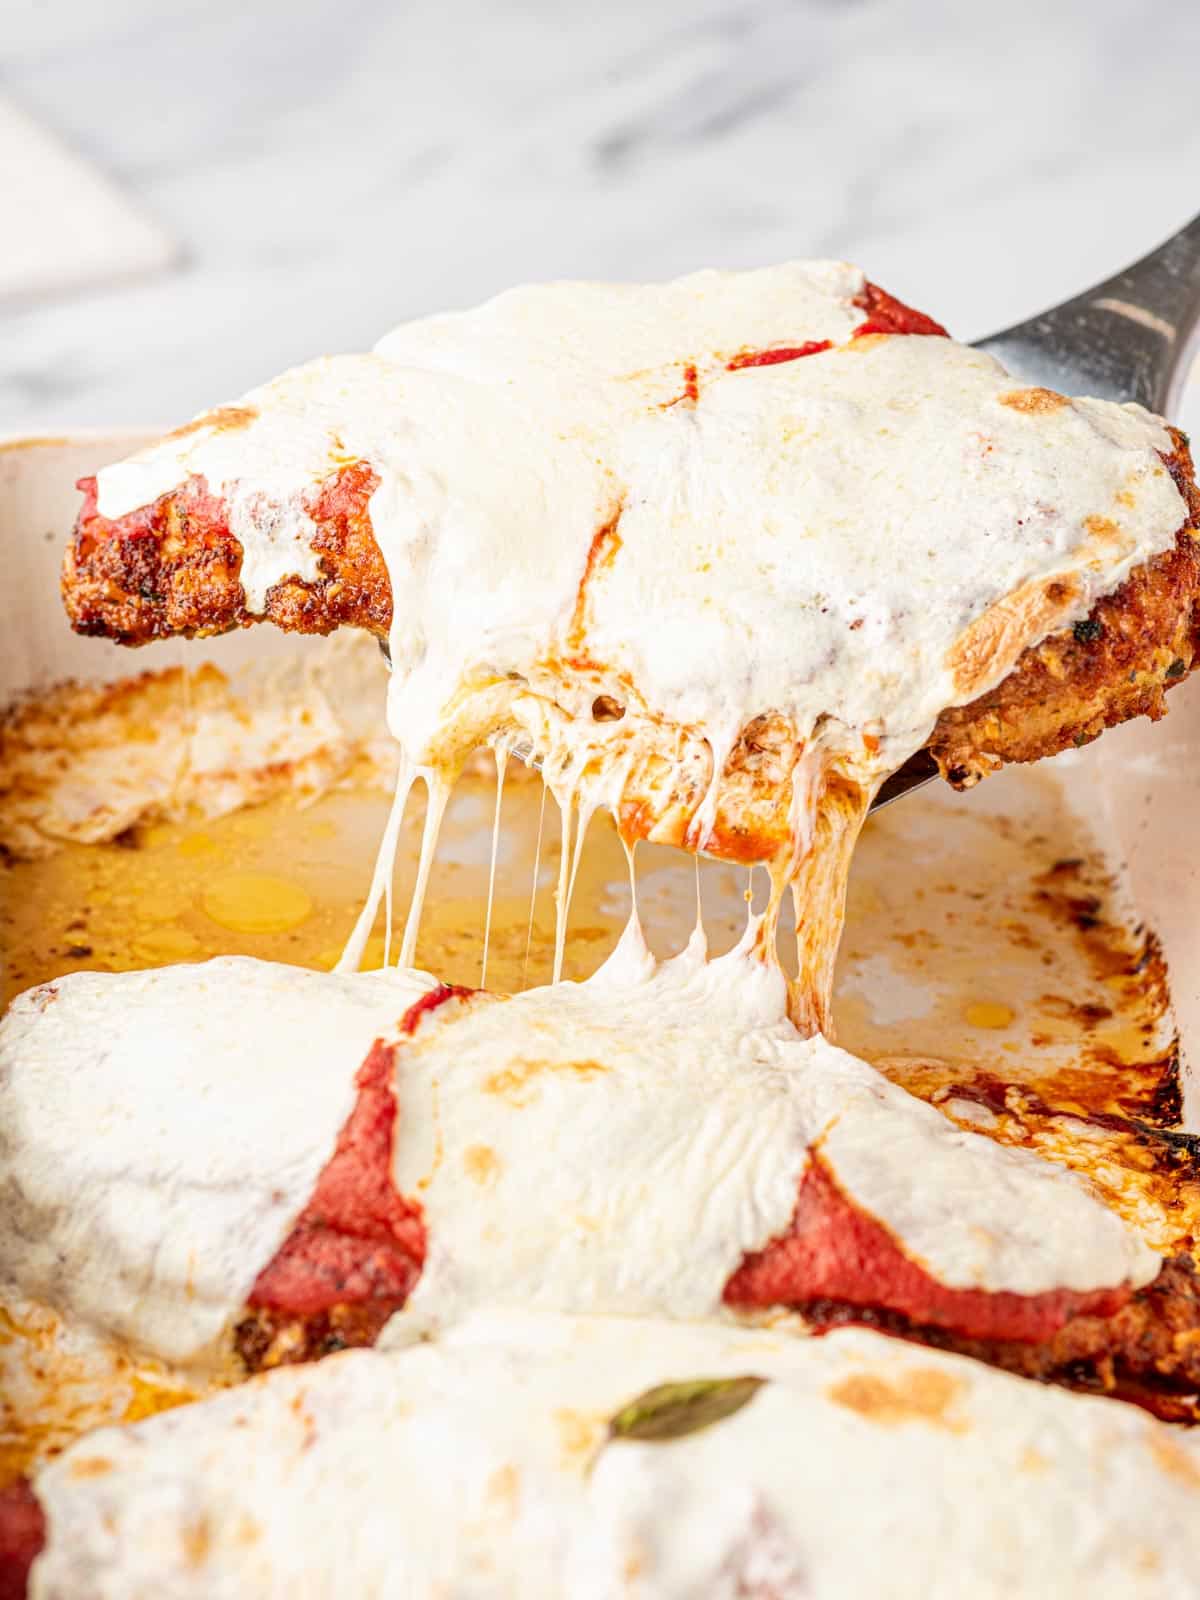 A spatula lifts a piece of easy baked chicken parm out of a baking dish. Stringy cheese is stretching from the dish.